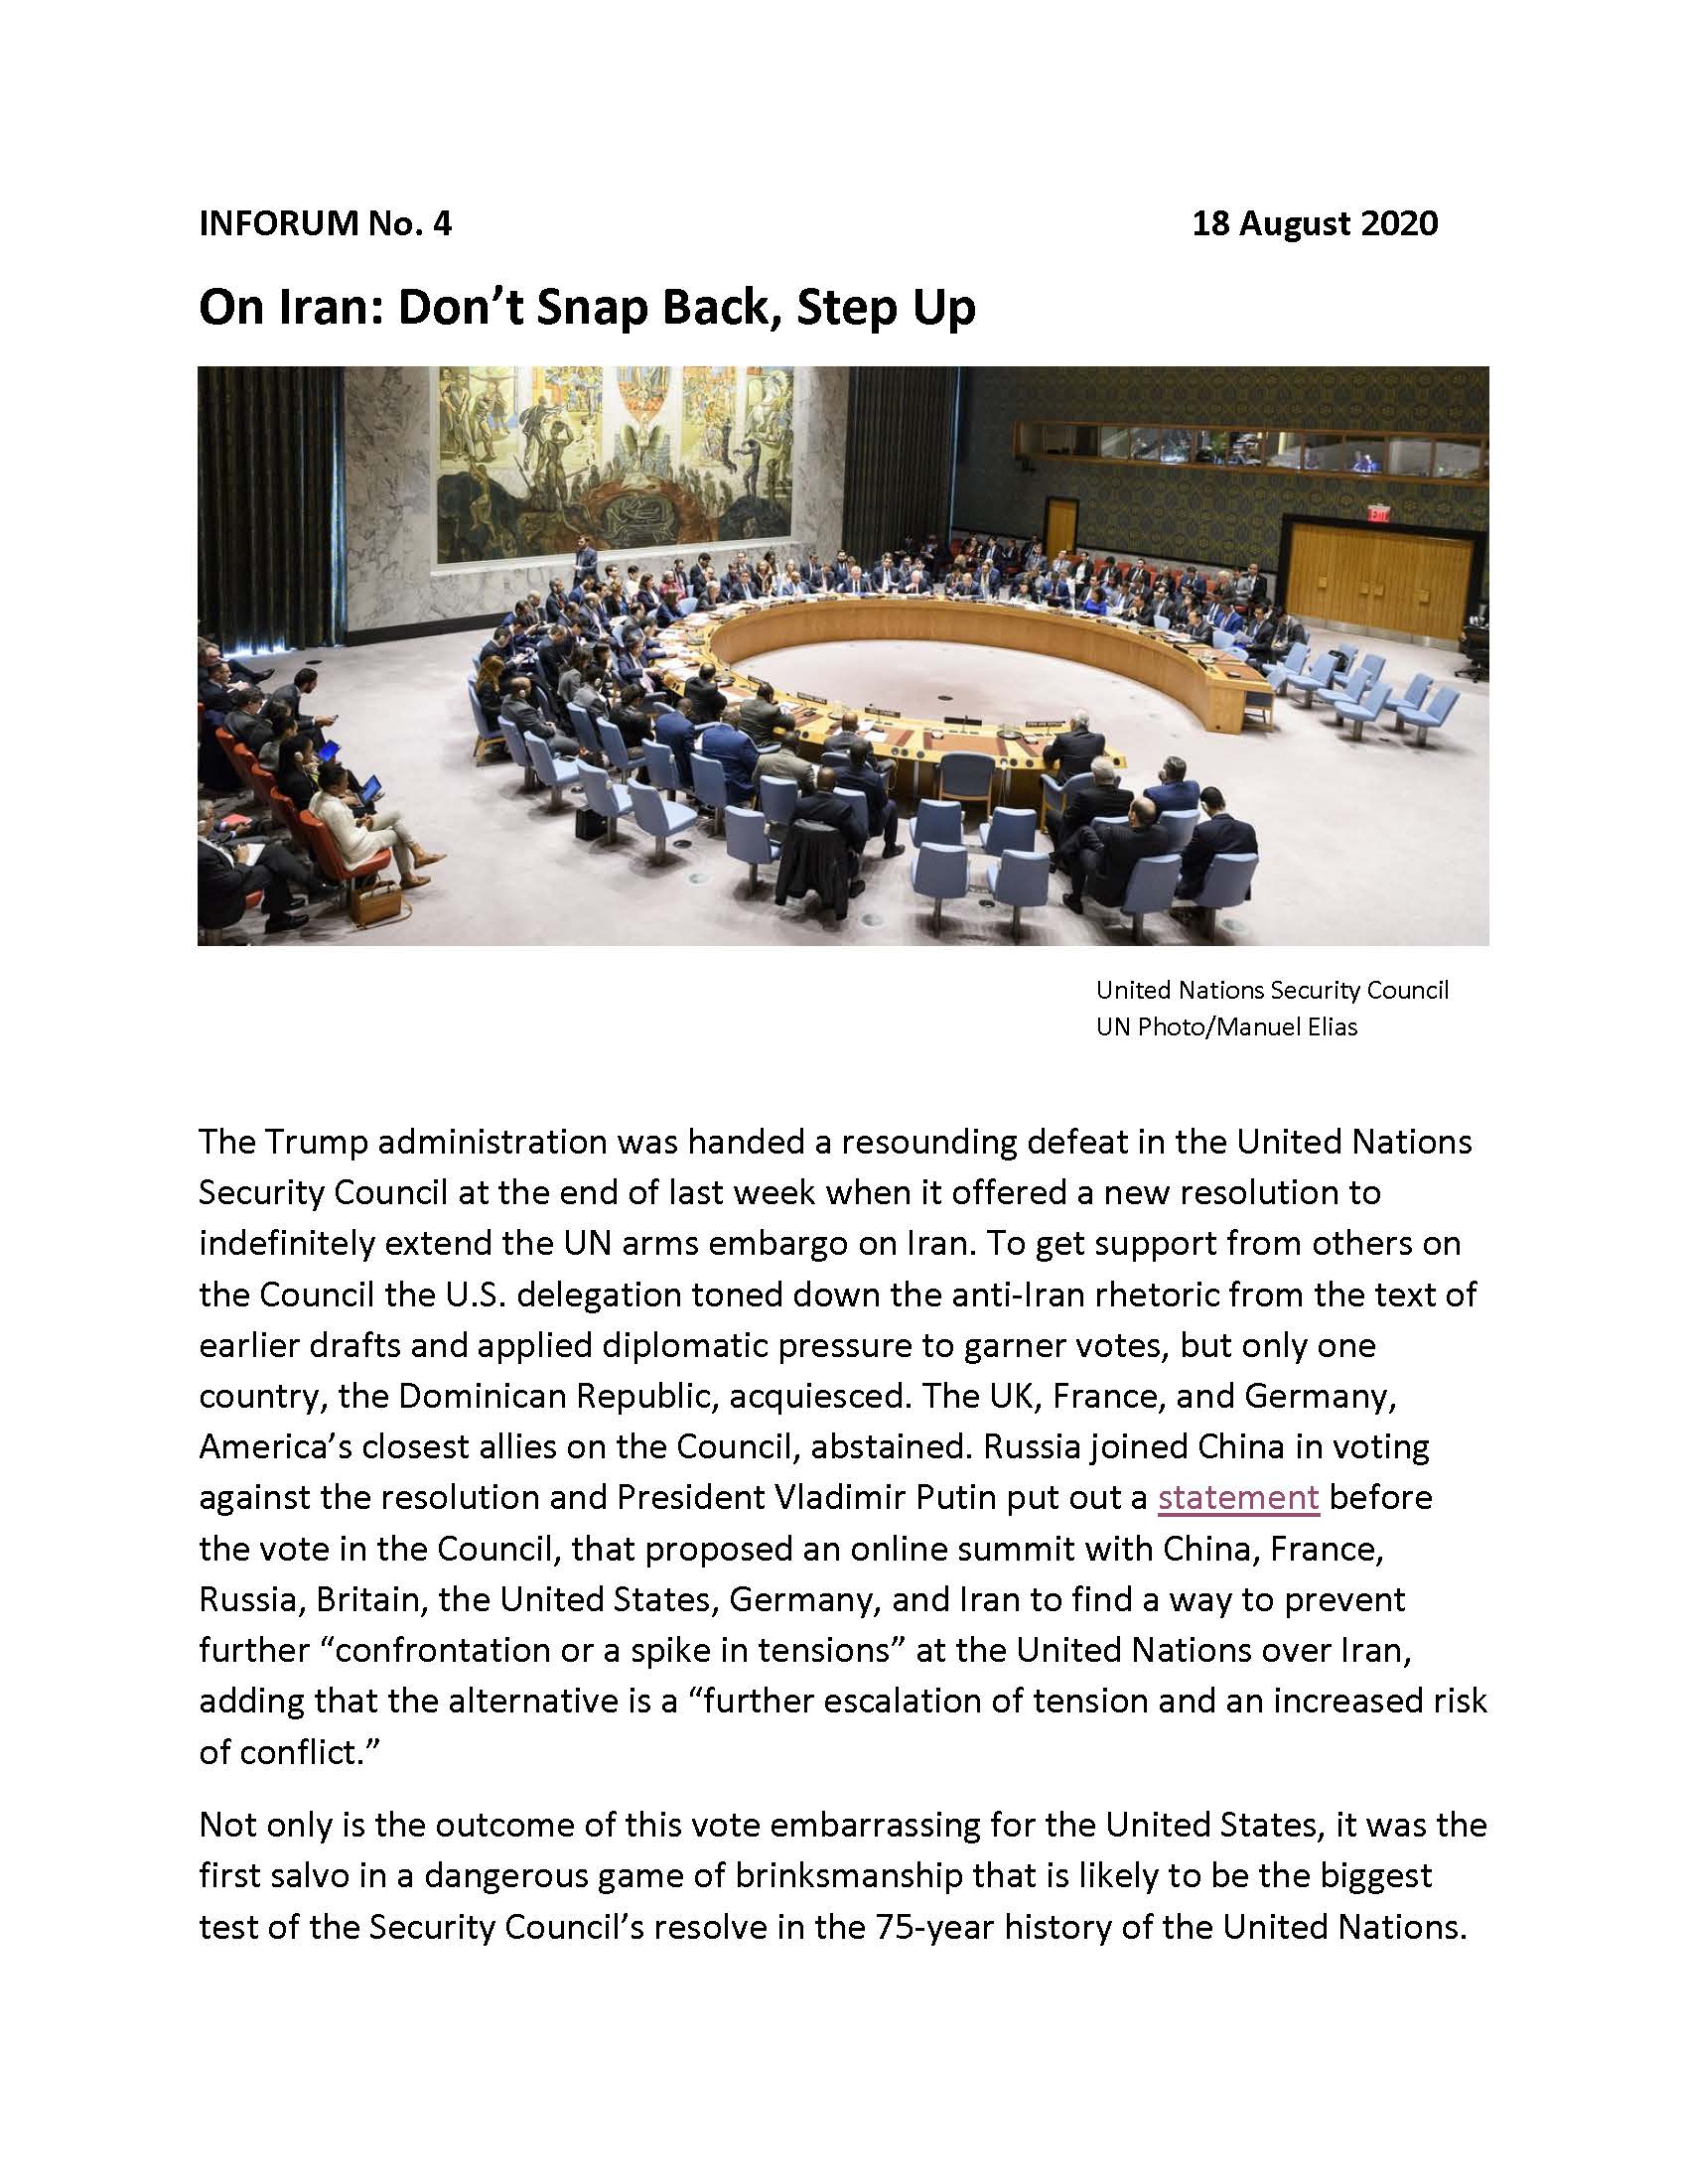 On Iran: Don’t Snap Back, Step Up